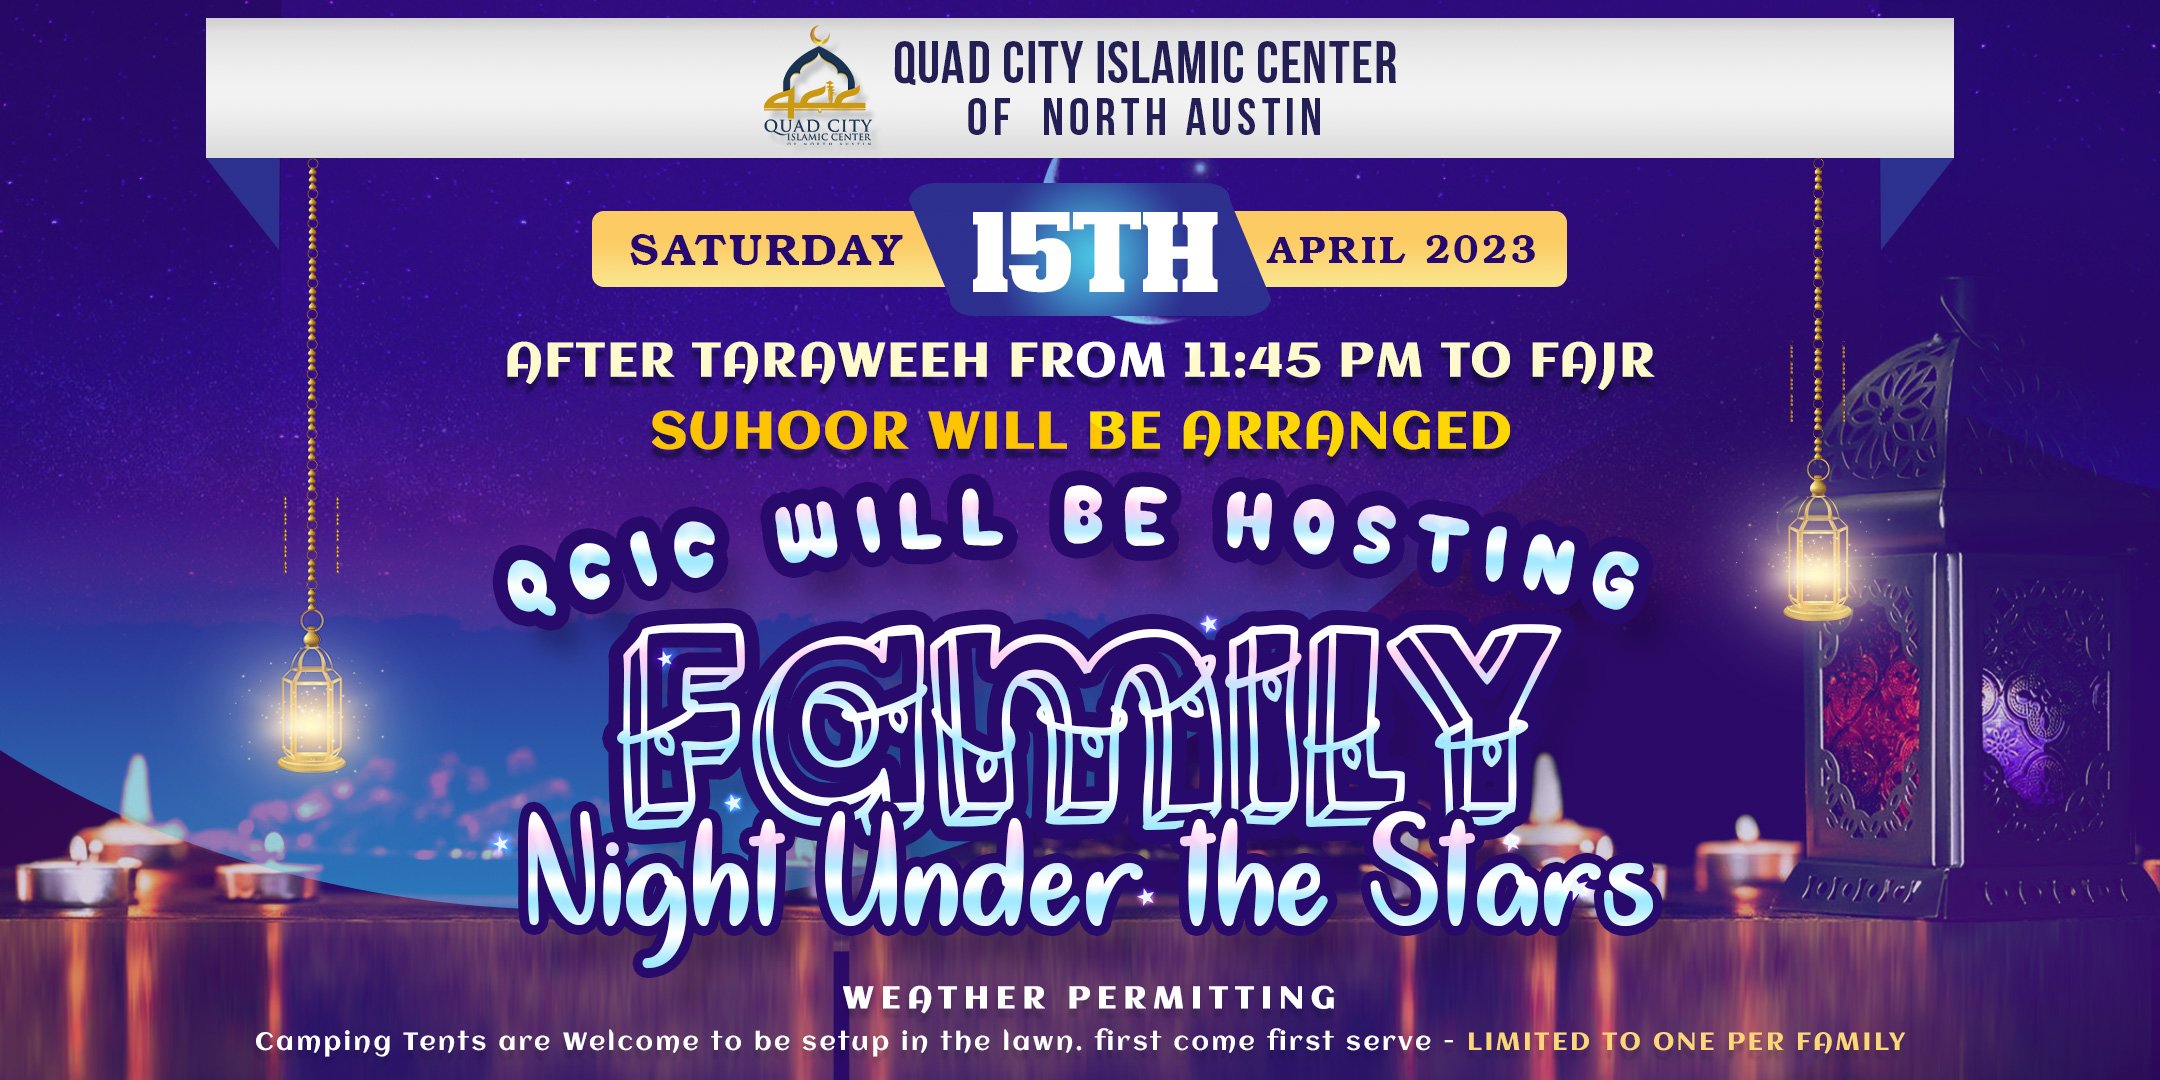 QCIC will be hosting Family Night Under the Stars